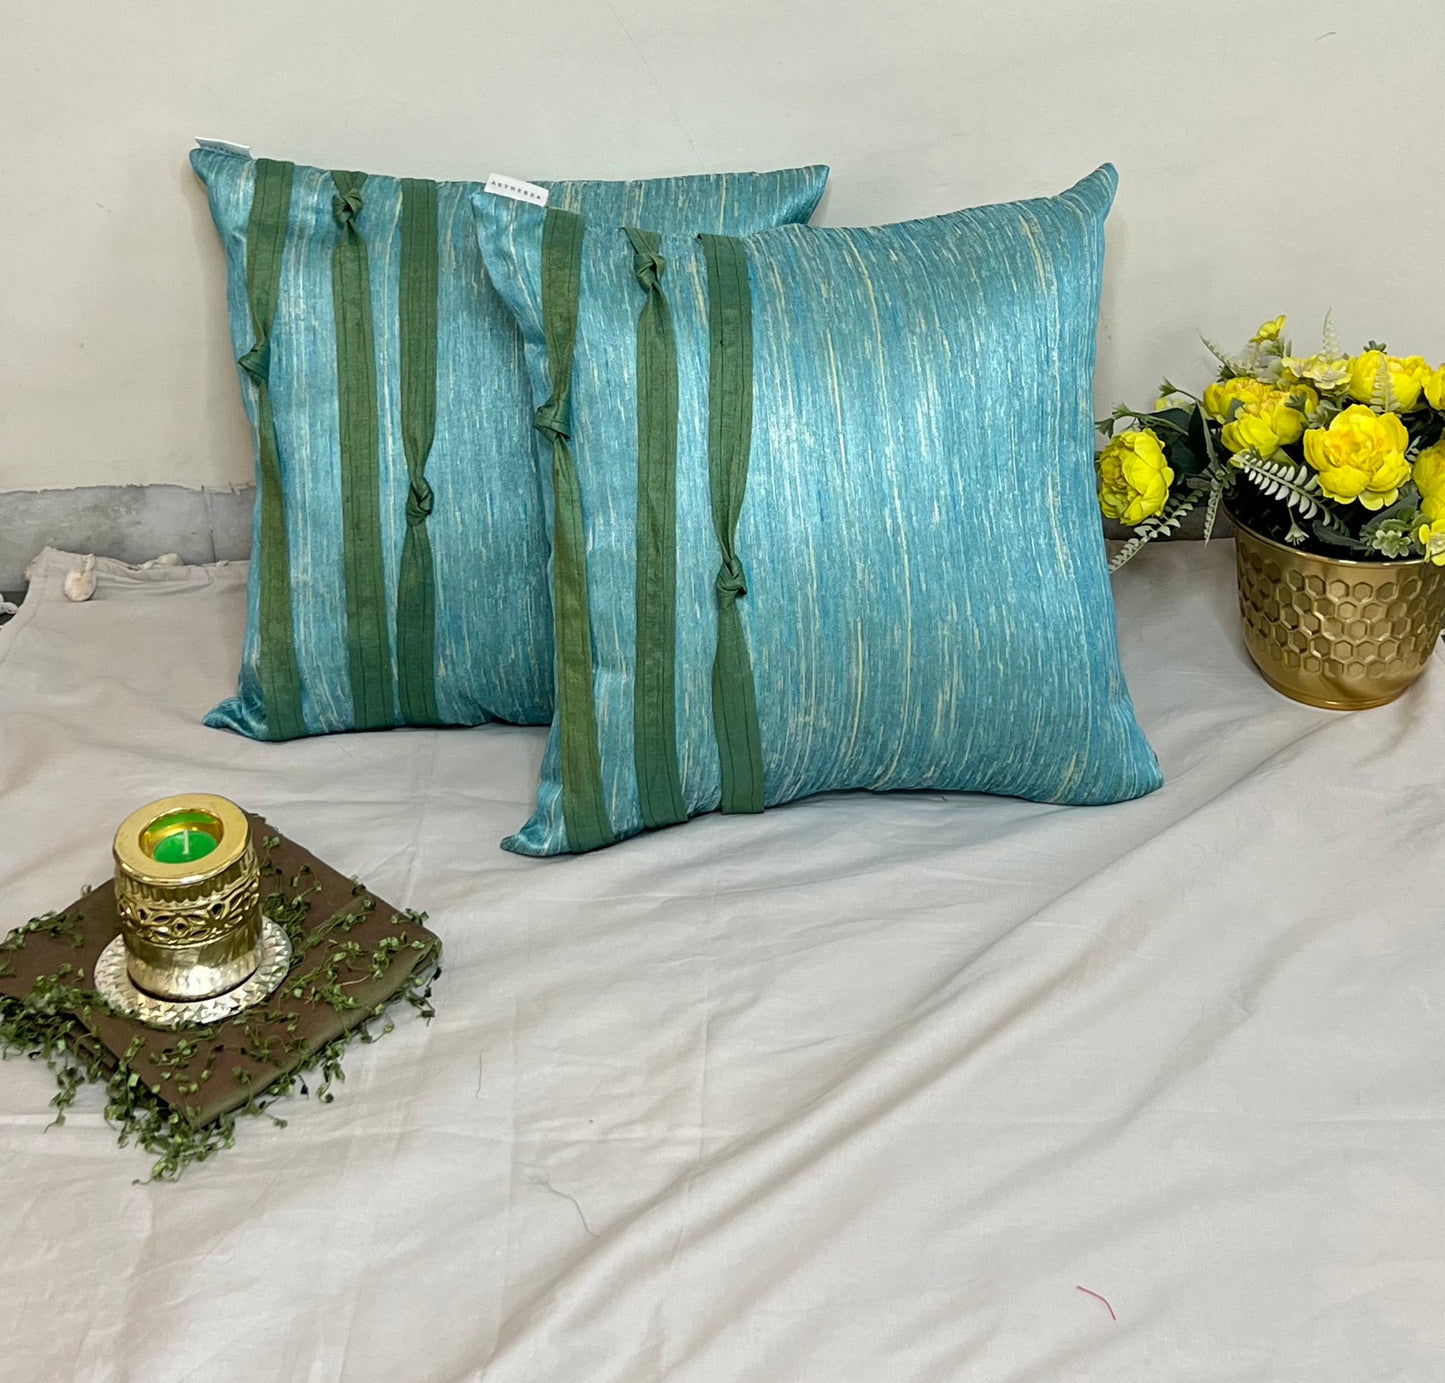 Knots Cushion Cover Sets at Kamakhyaa by Aetherea. This item is 100% Cotton, Blue, Cushion covers, Home, Plain, Solid, Upcycled